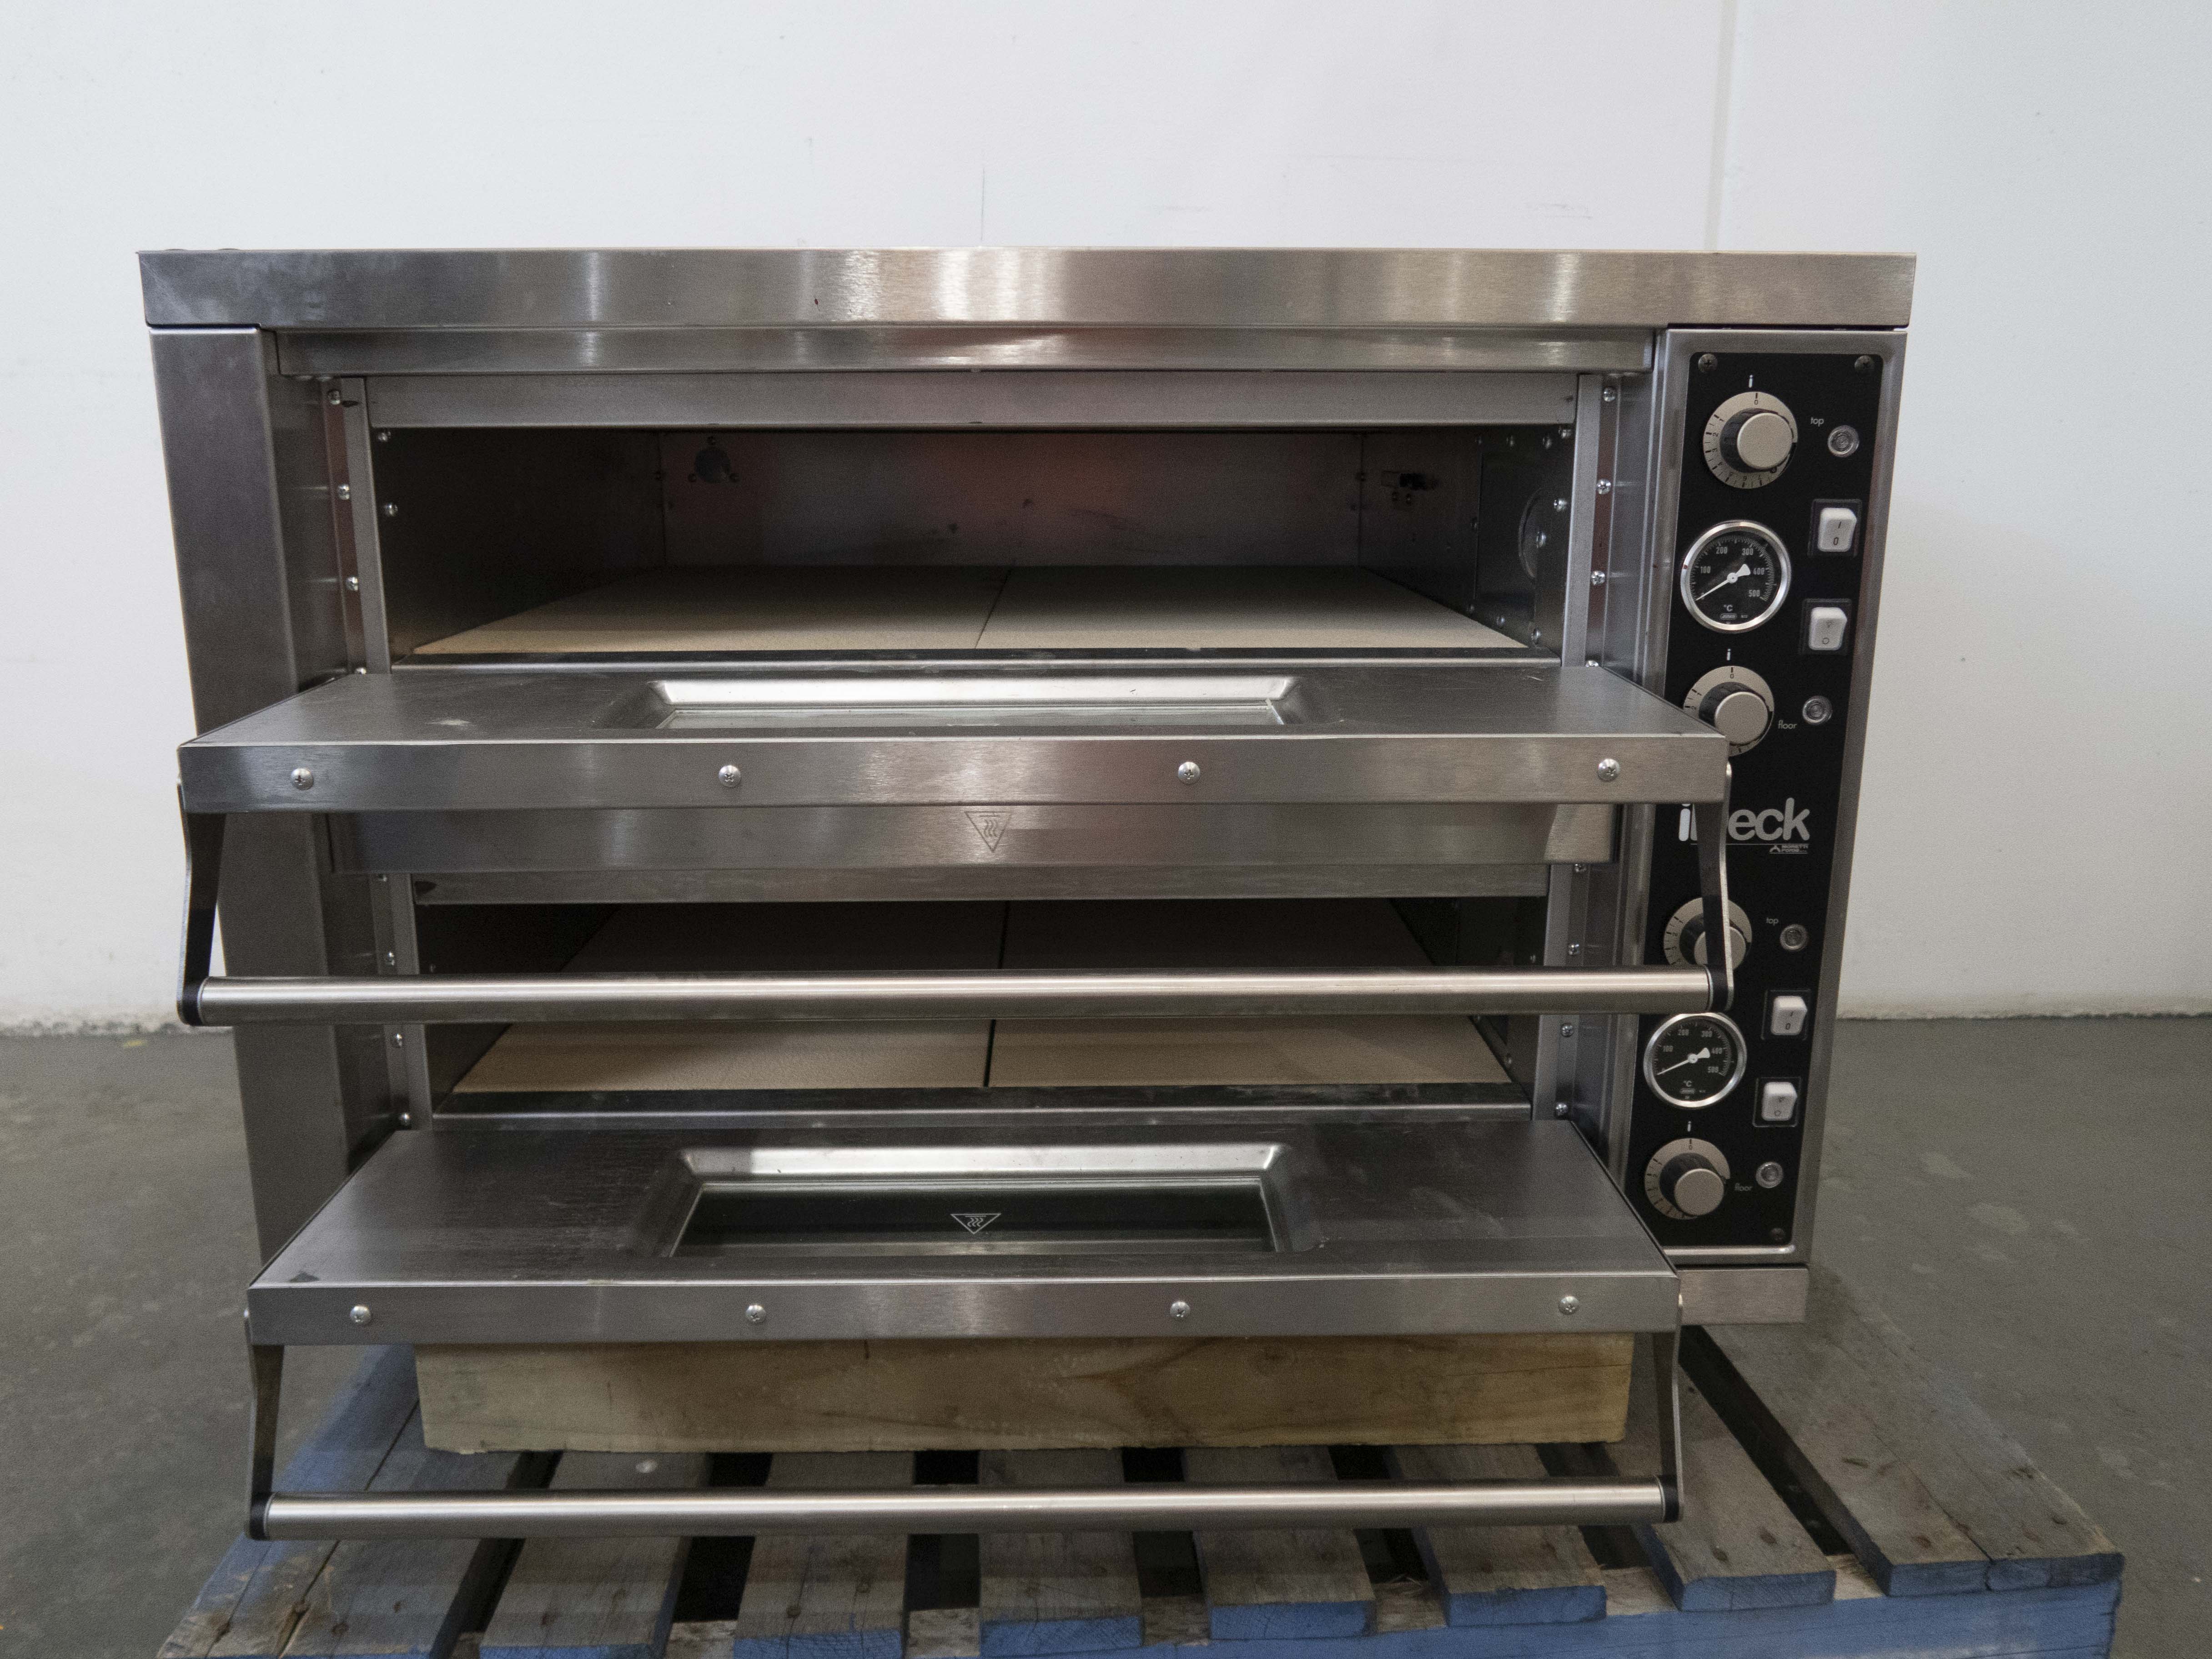 Thumbnail - Moretti Forni PD 72.72 Double Deck Electric Oven With Stand